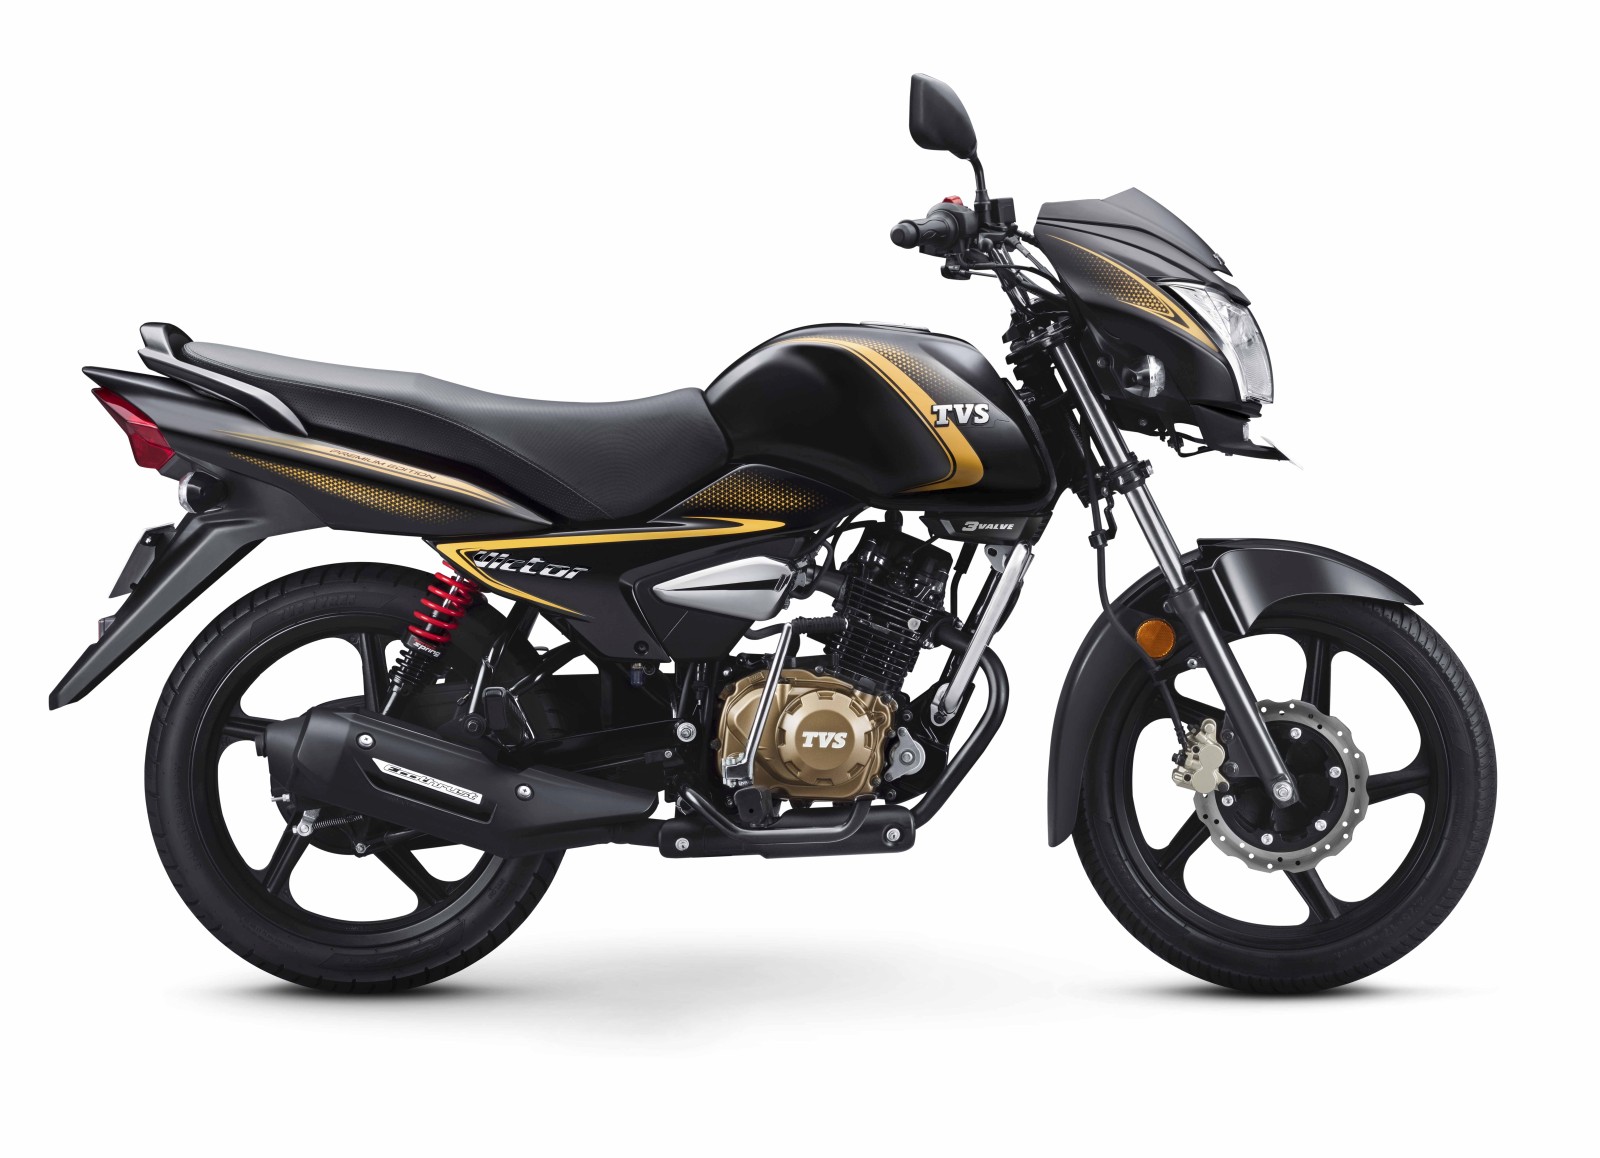  TVS Motors Announces Festive Season Offers All Details Prices And 